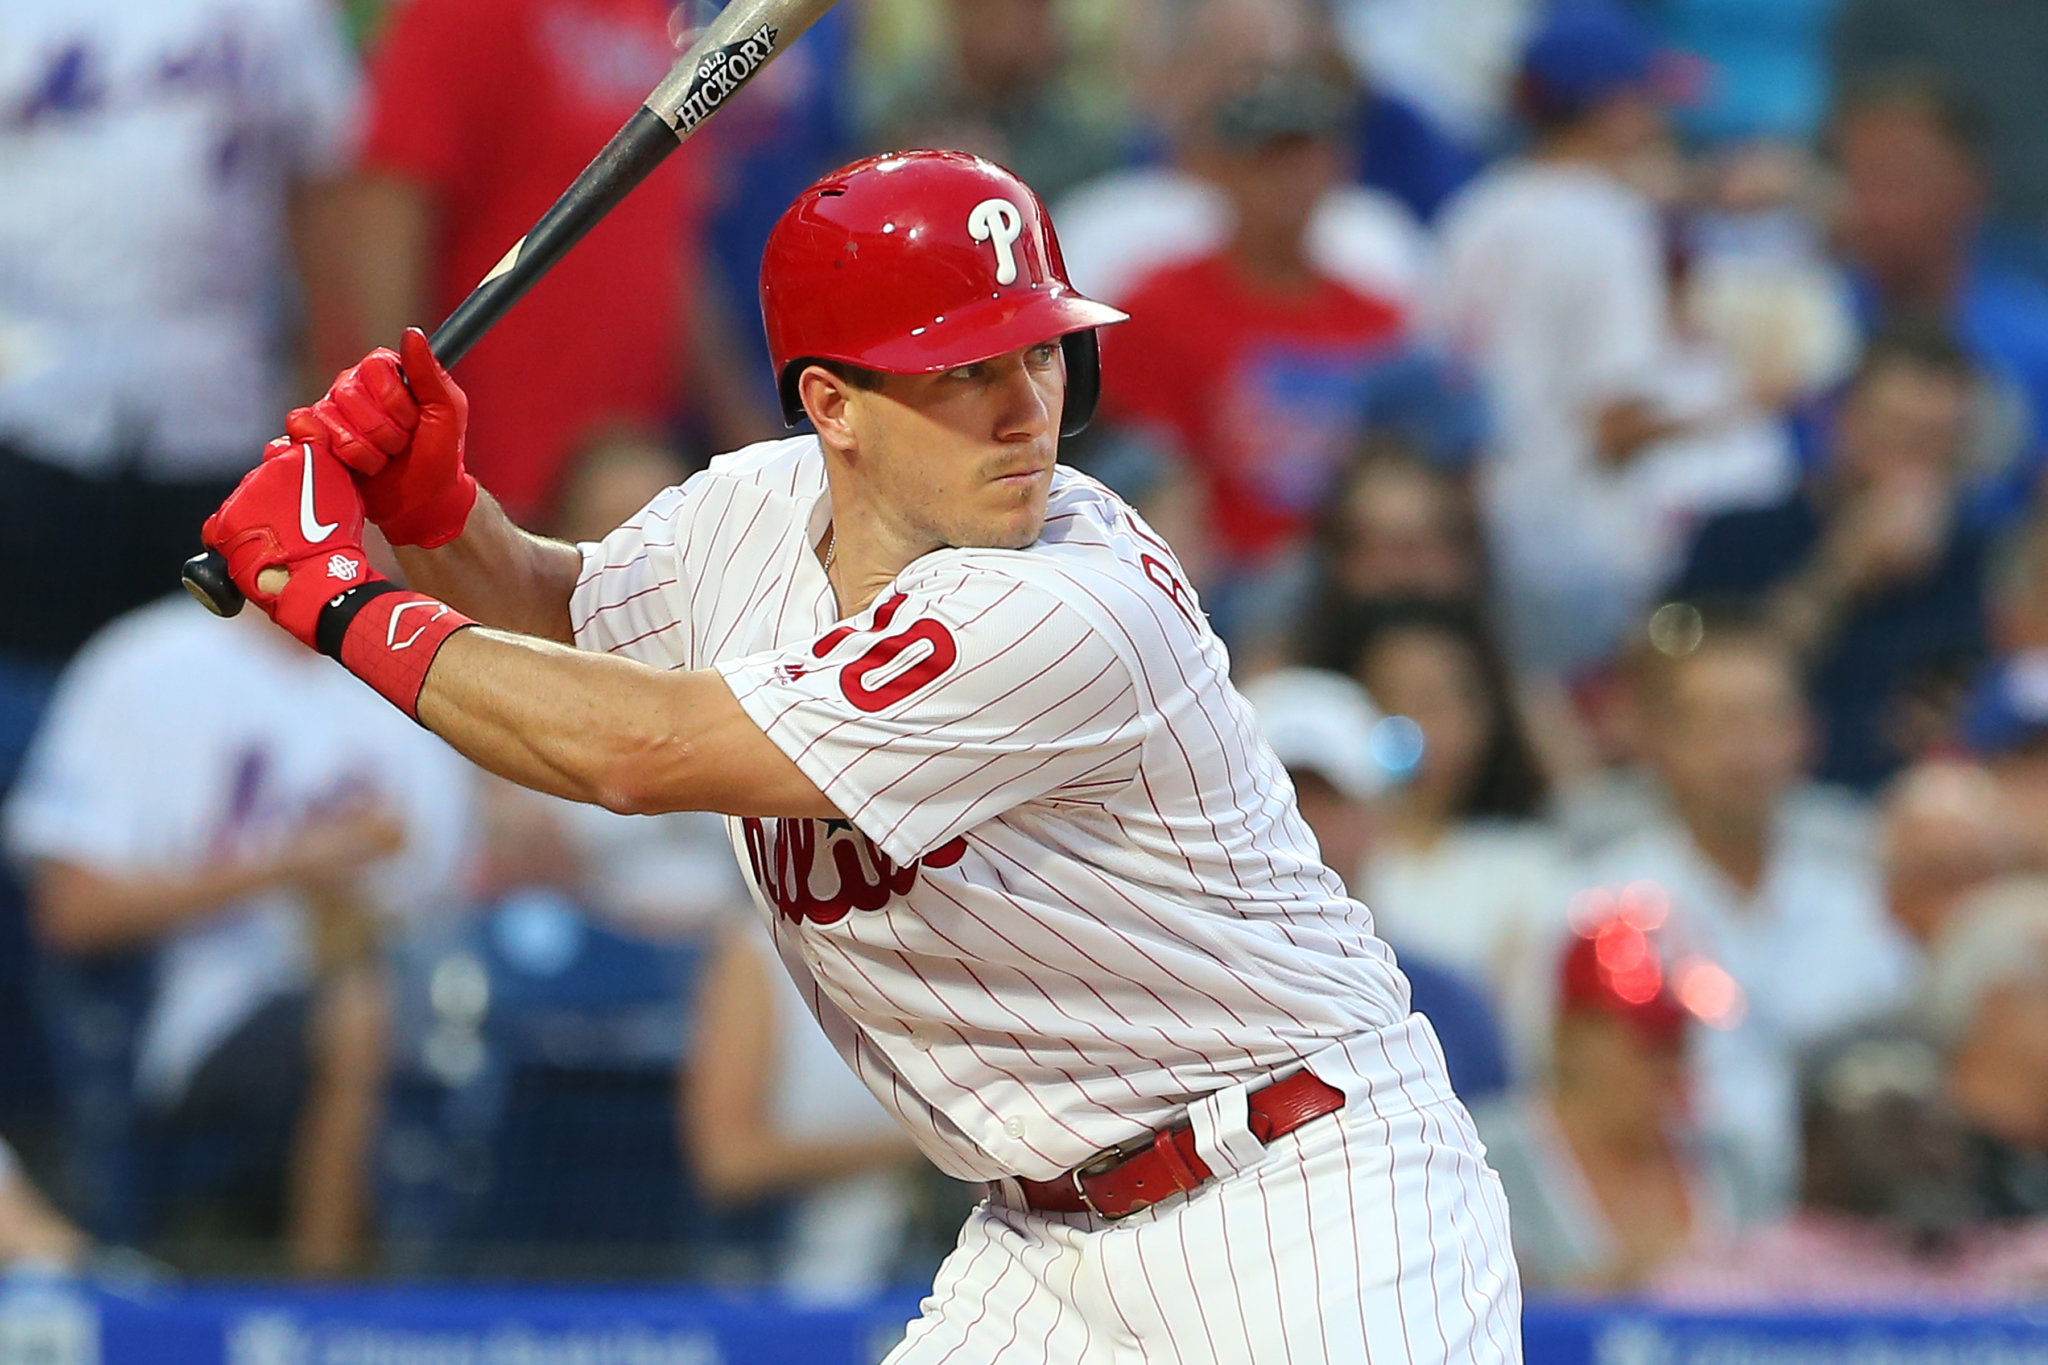 All signs point to JT Realmuto batting leadoff for Phils Metro